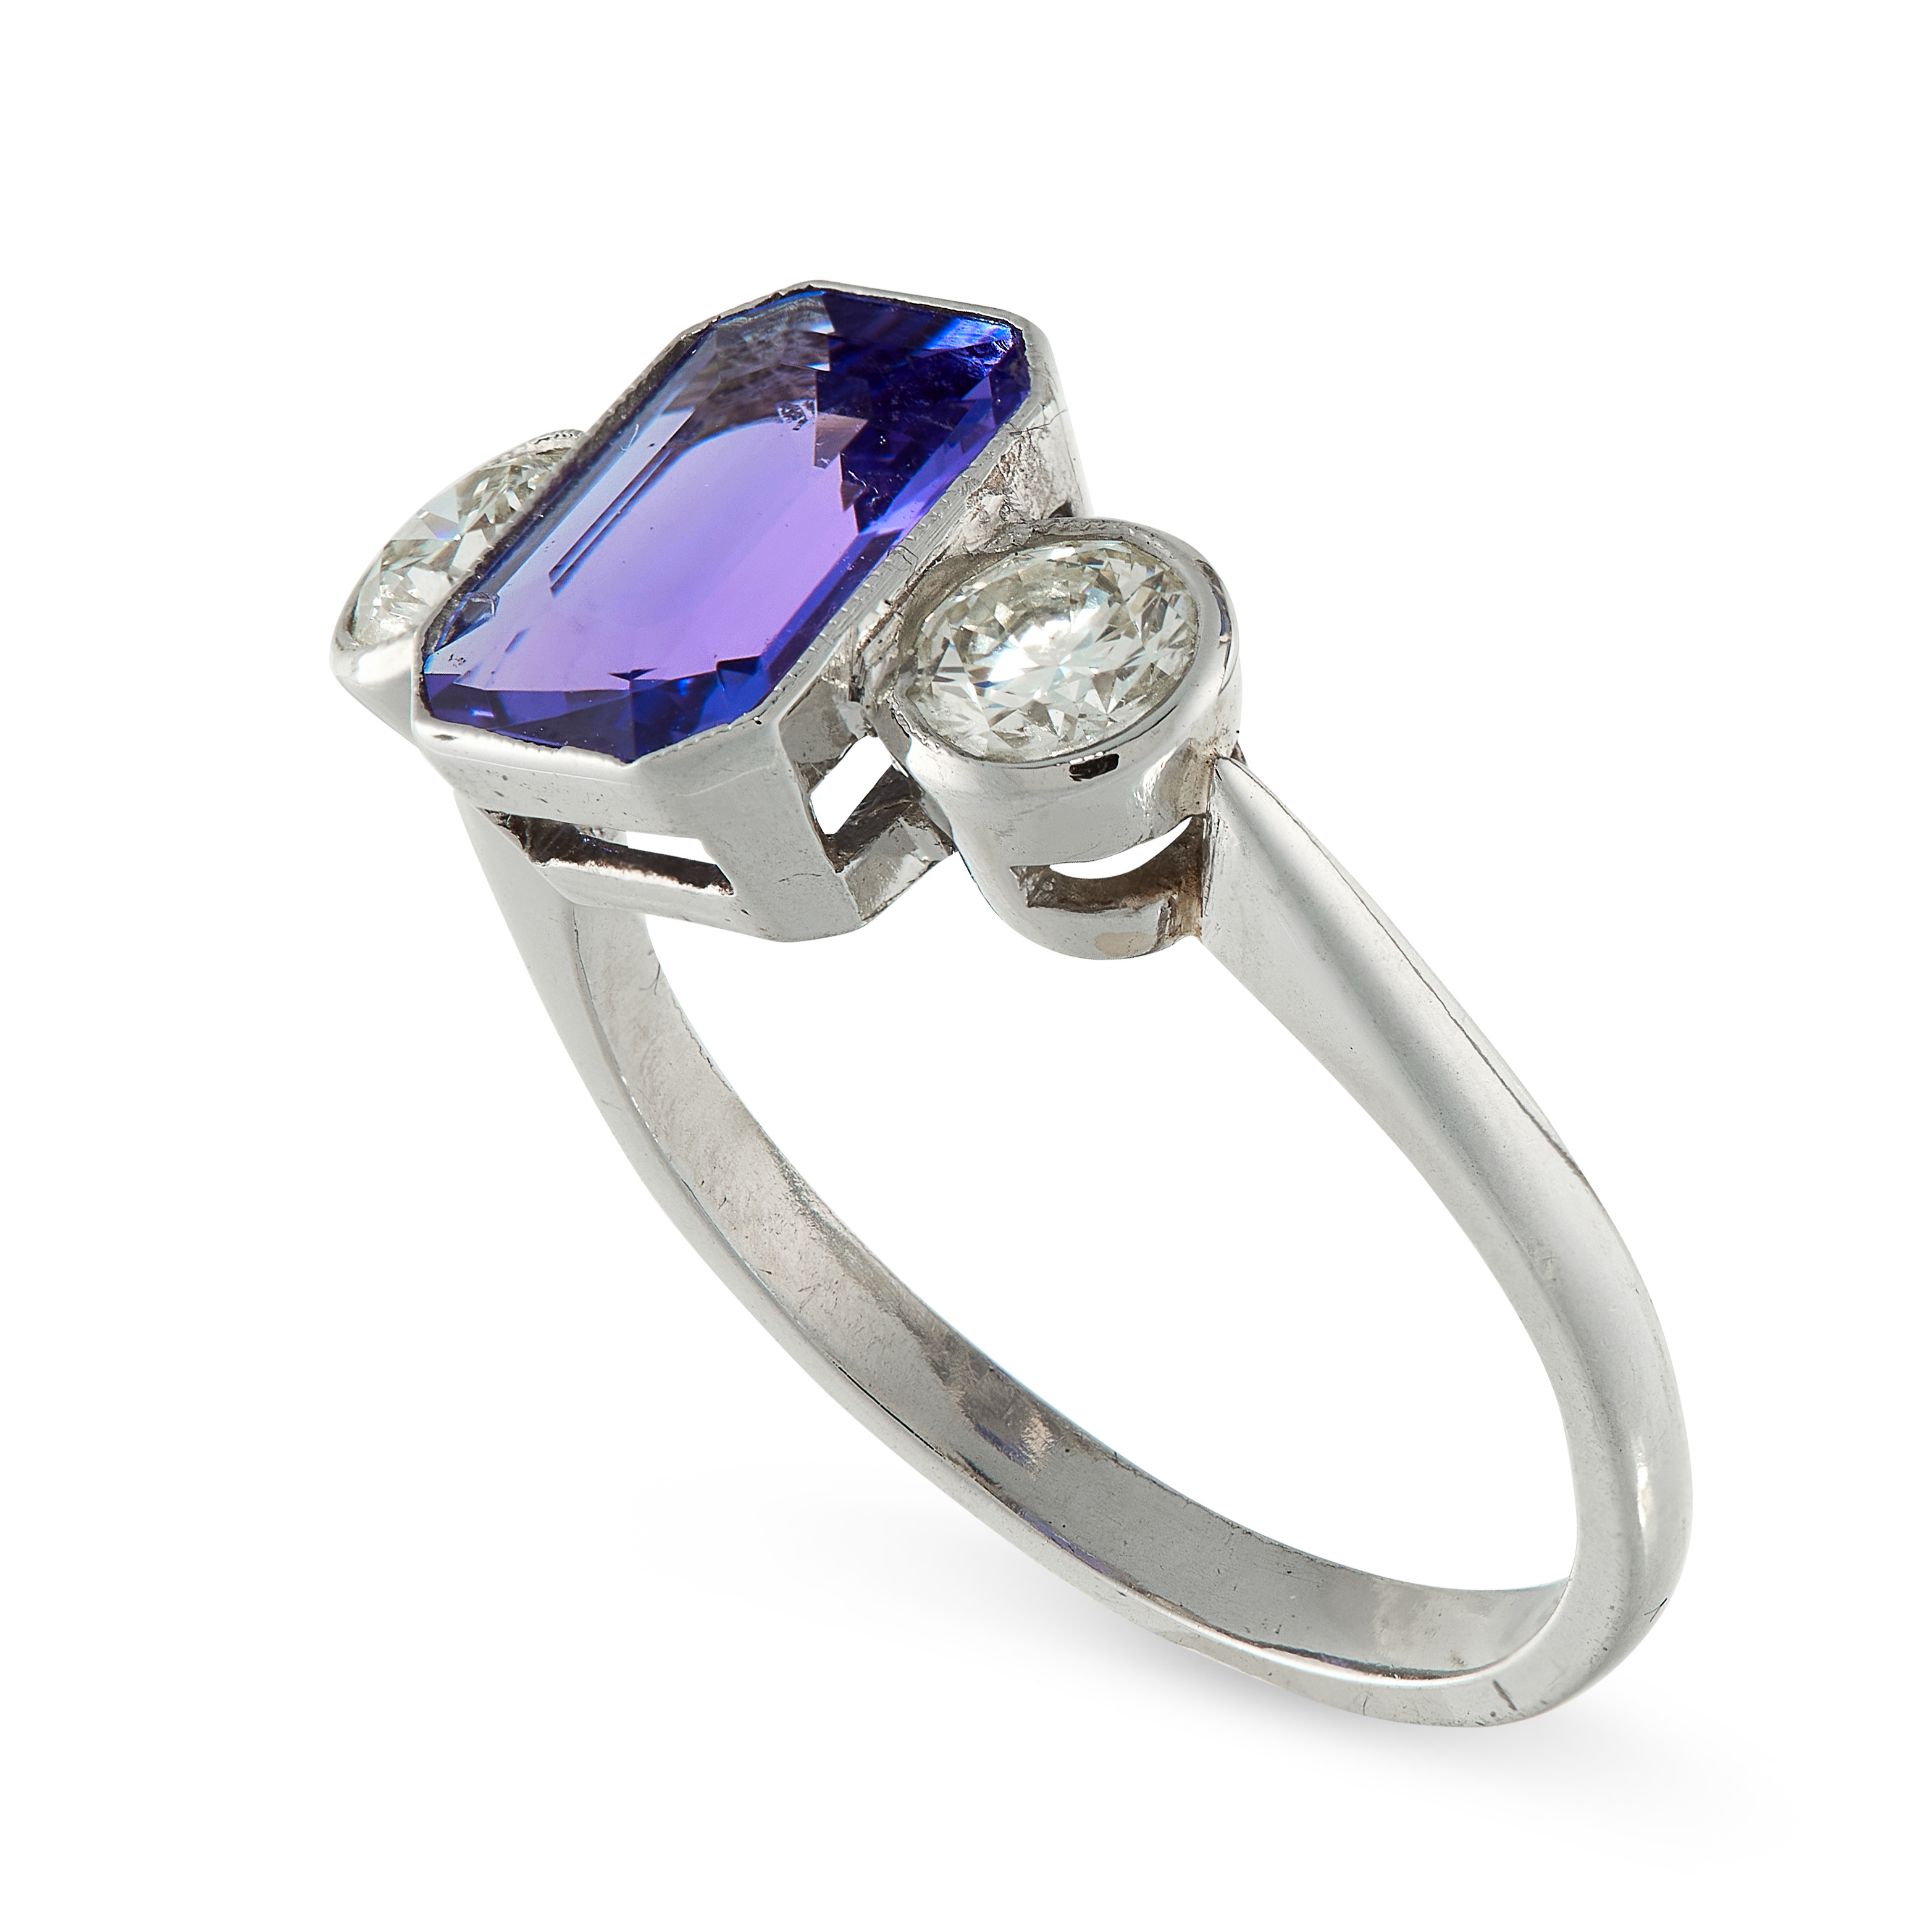 A TANZANITE AND DIAMOND RING in platinum, set with an emerald cut tanzanite of 2.25 carats, - Image 2 of 2